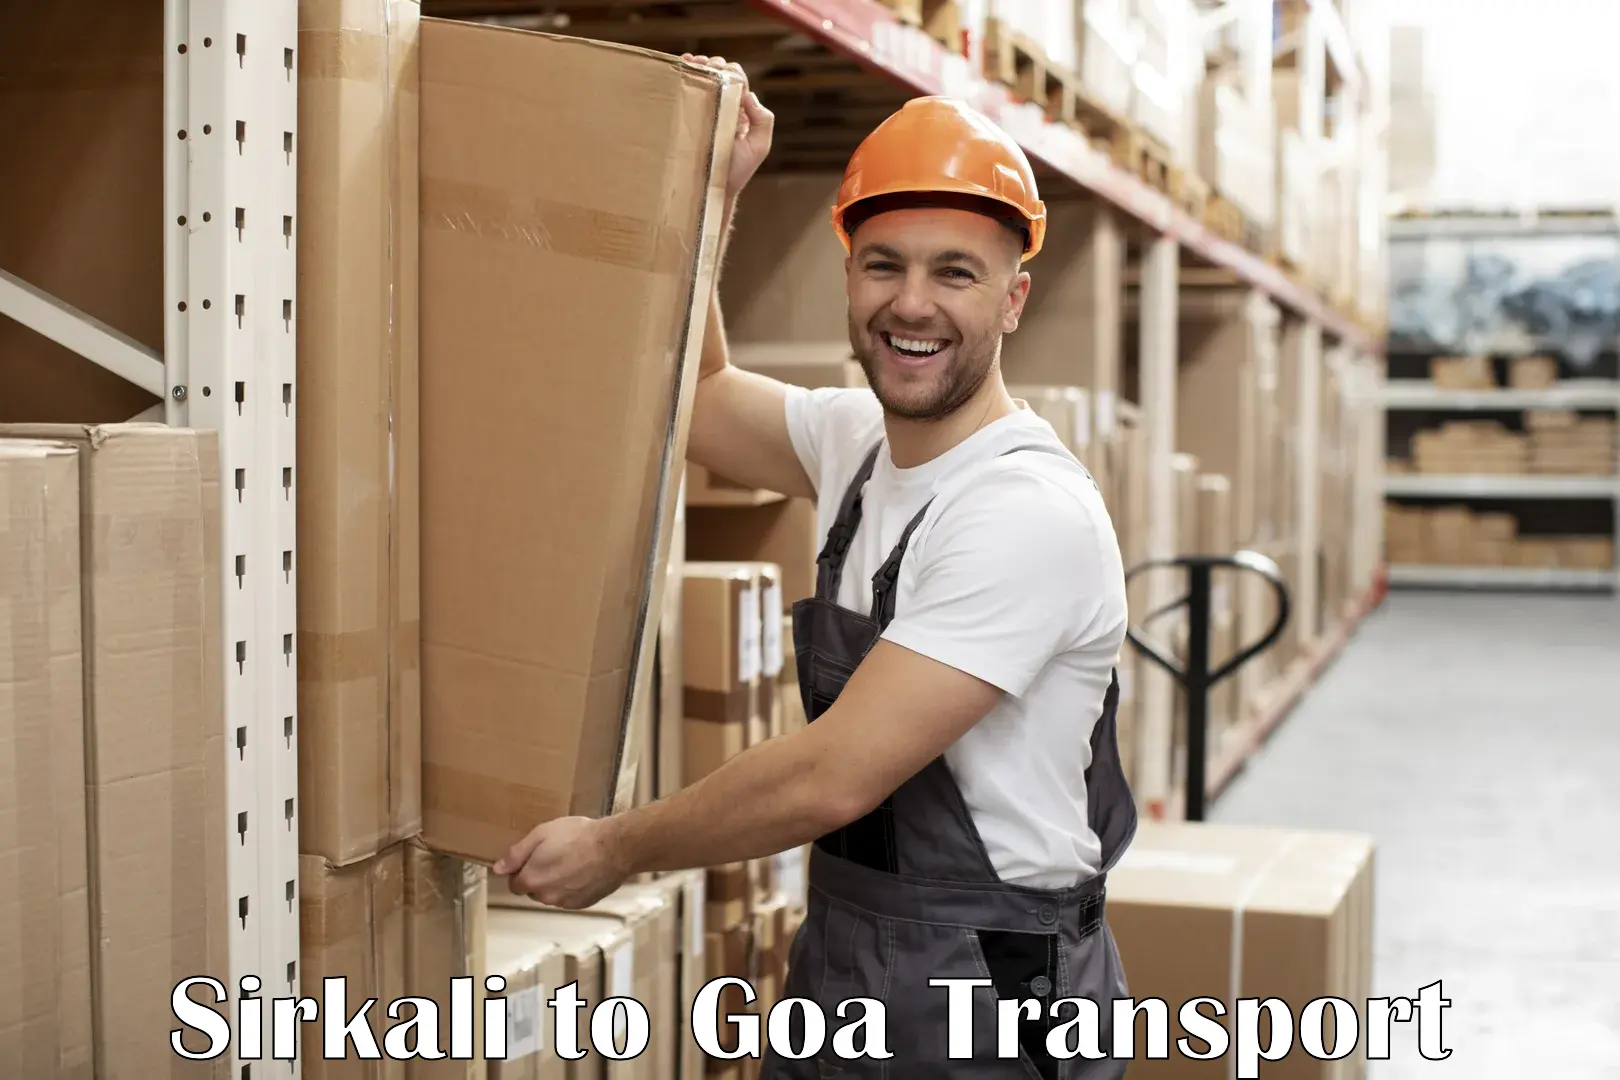 Goods delivery service Sirkali to Goa